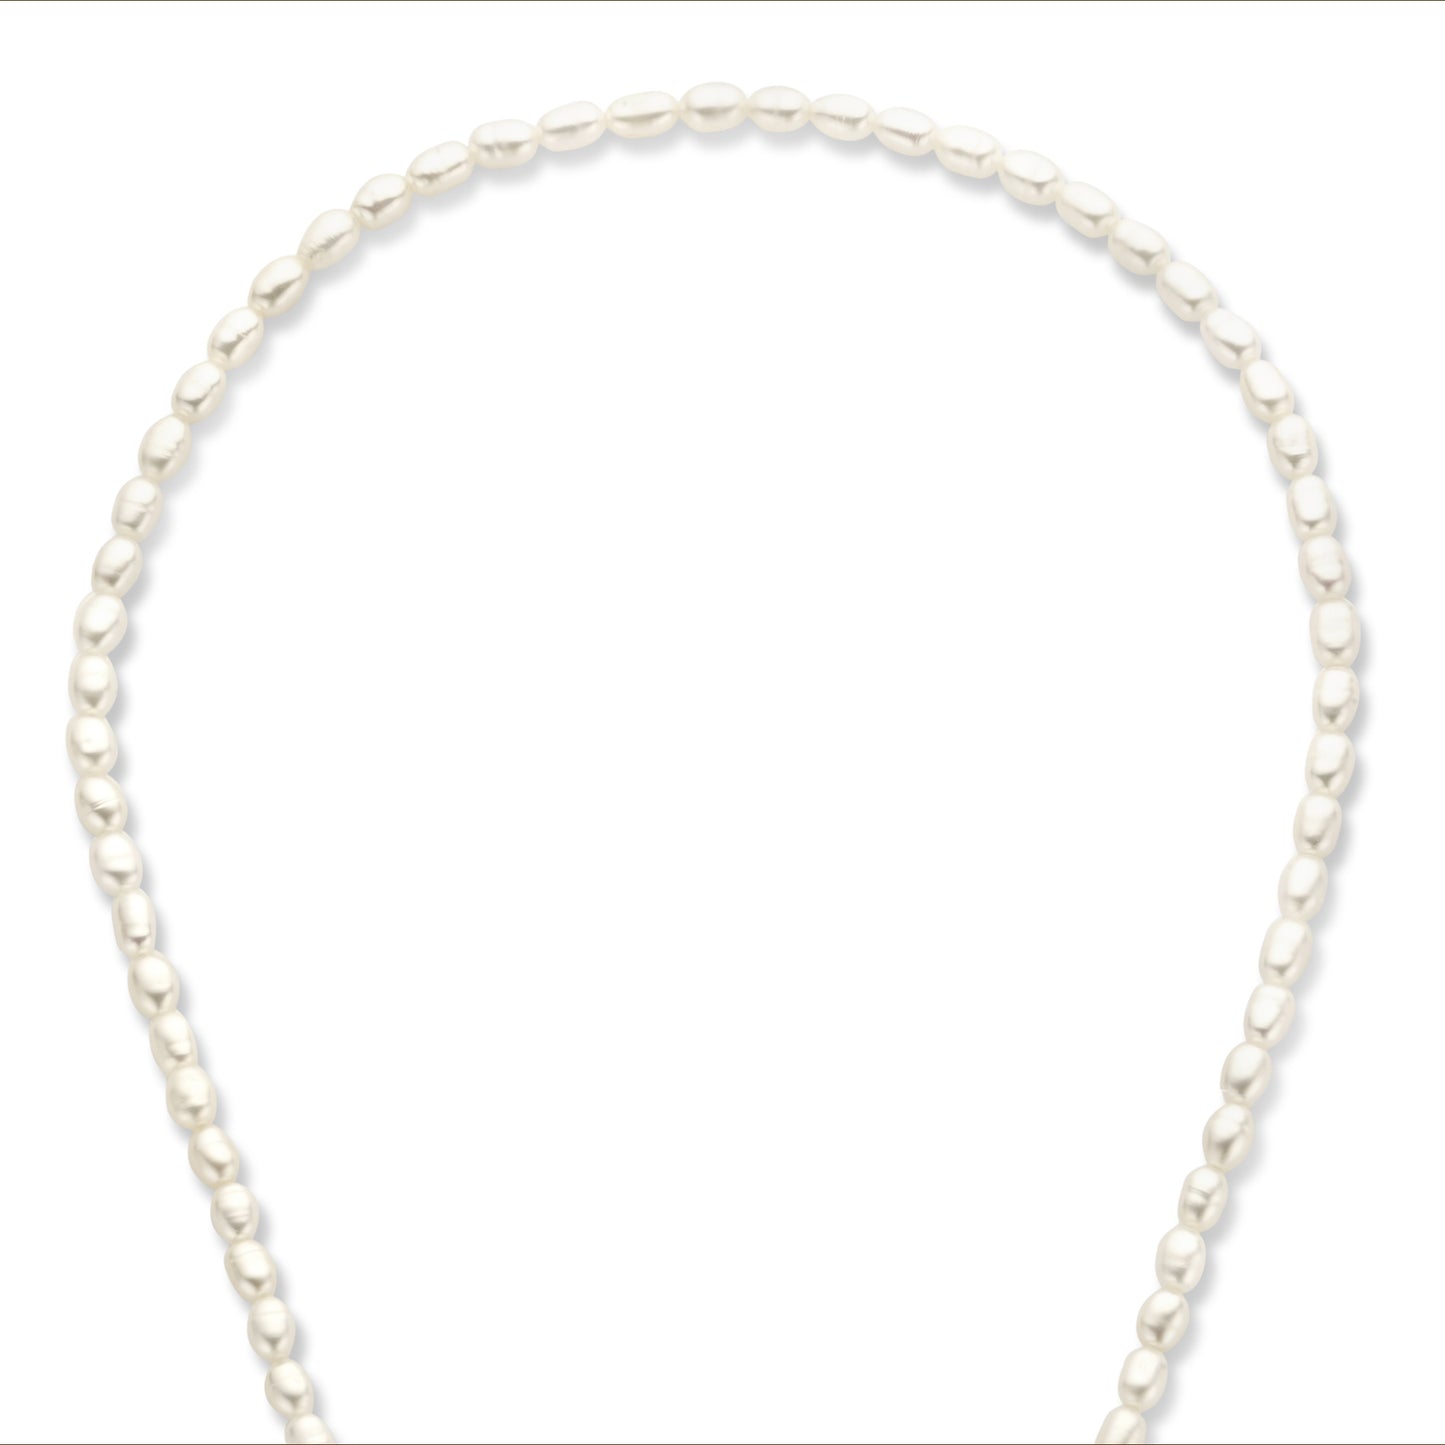 Brioso Cortona Bella 925 sterling silver gold plated pearl necklace with 14 karat gold plating